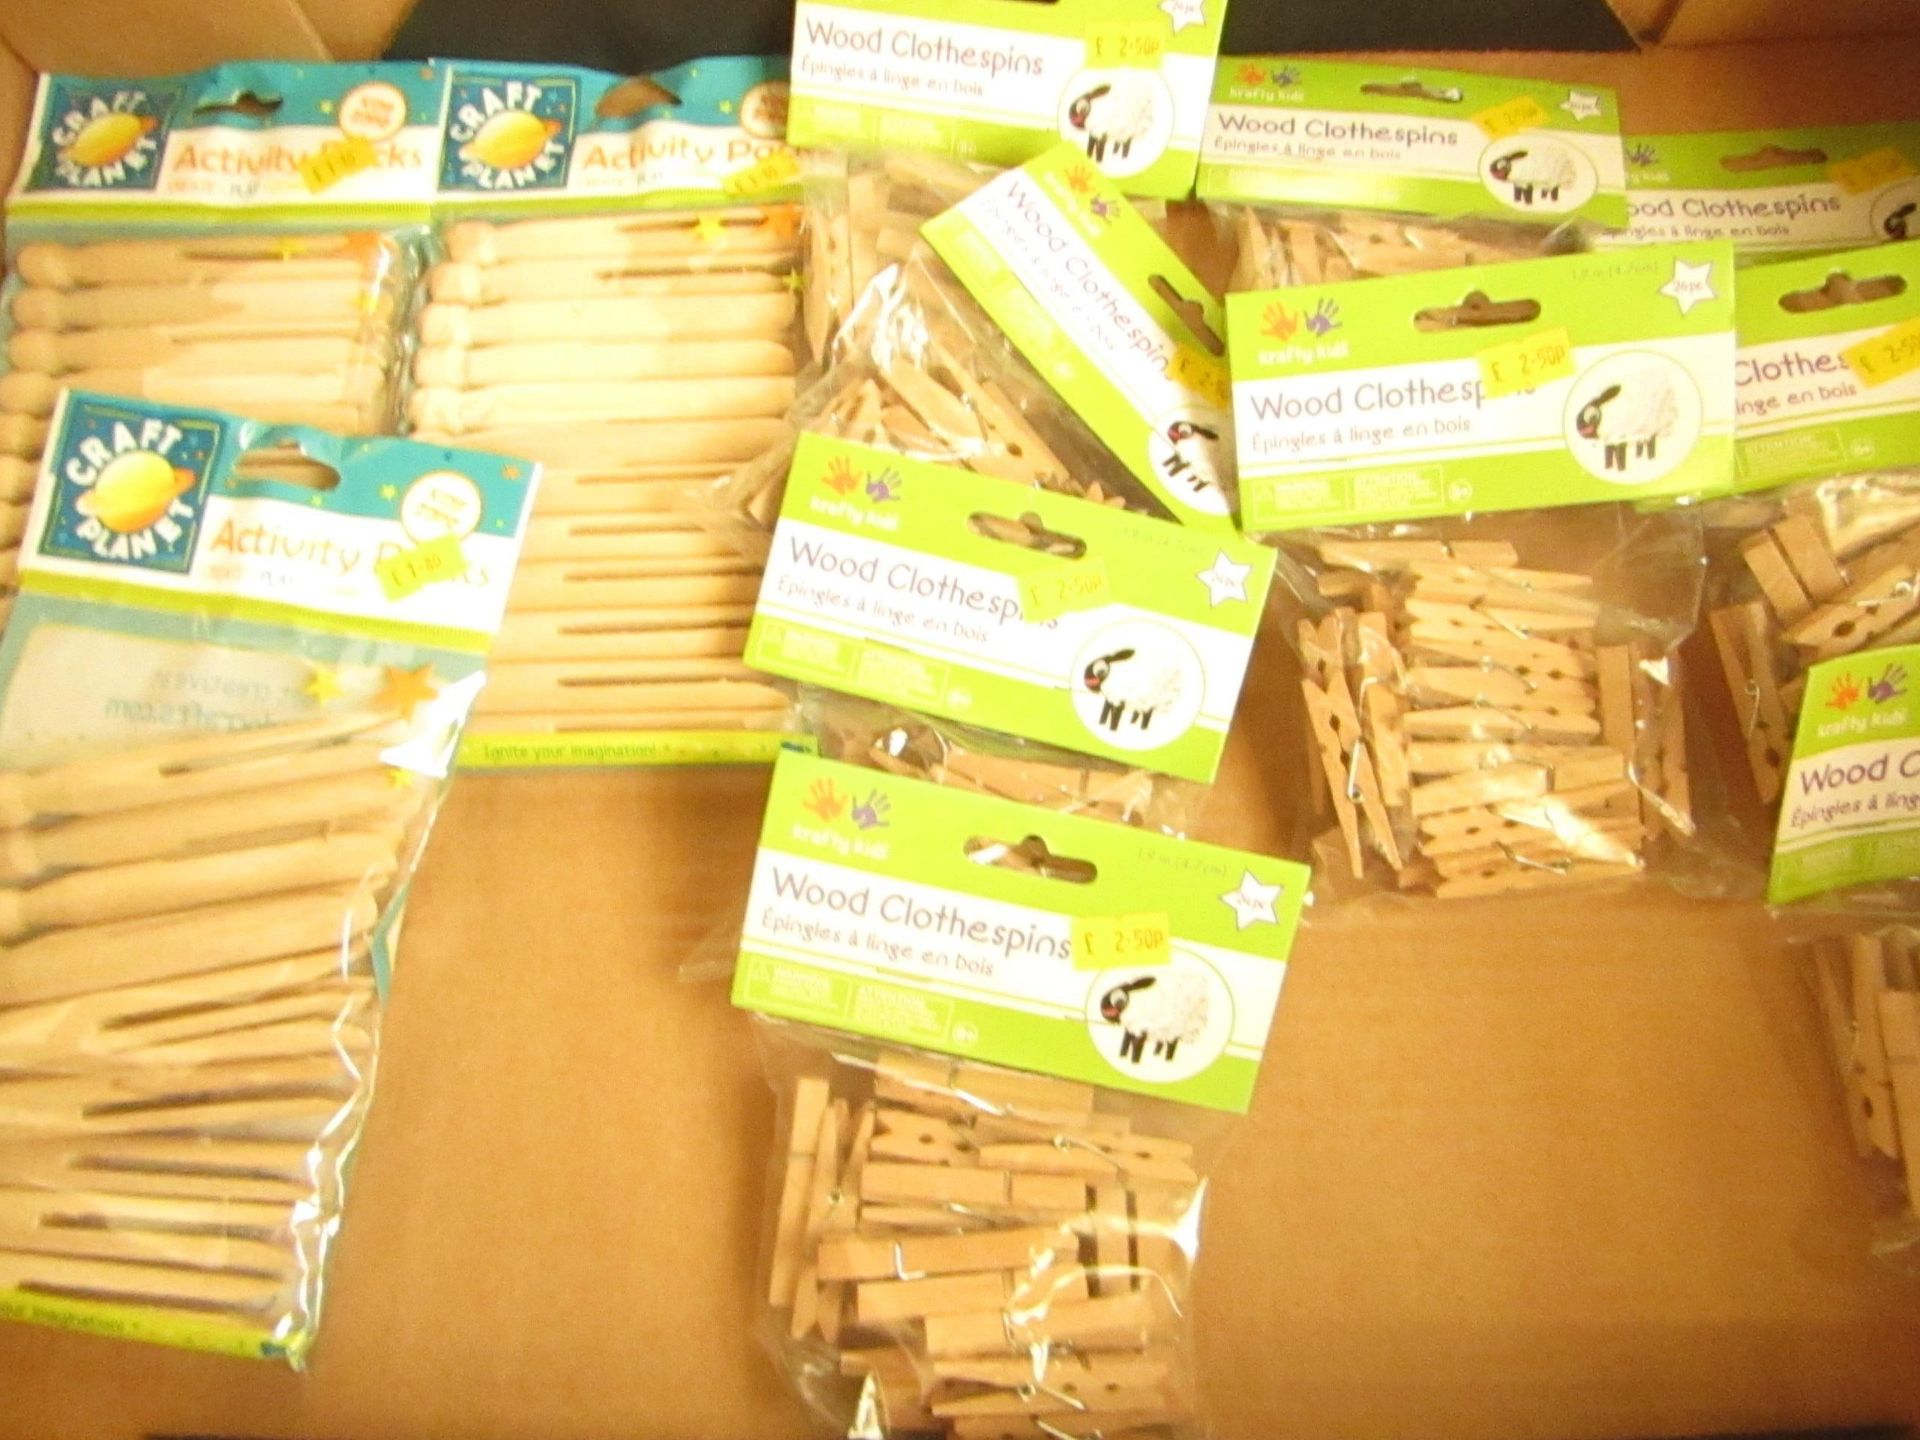 12 x various packs of Wood Clothes Pegs new see image